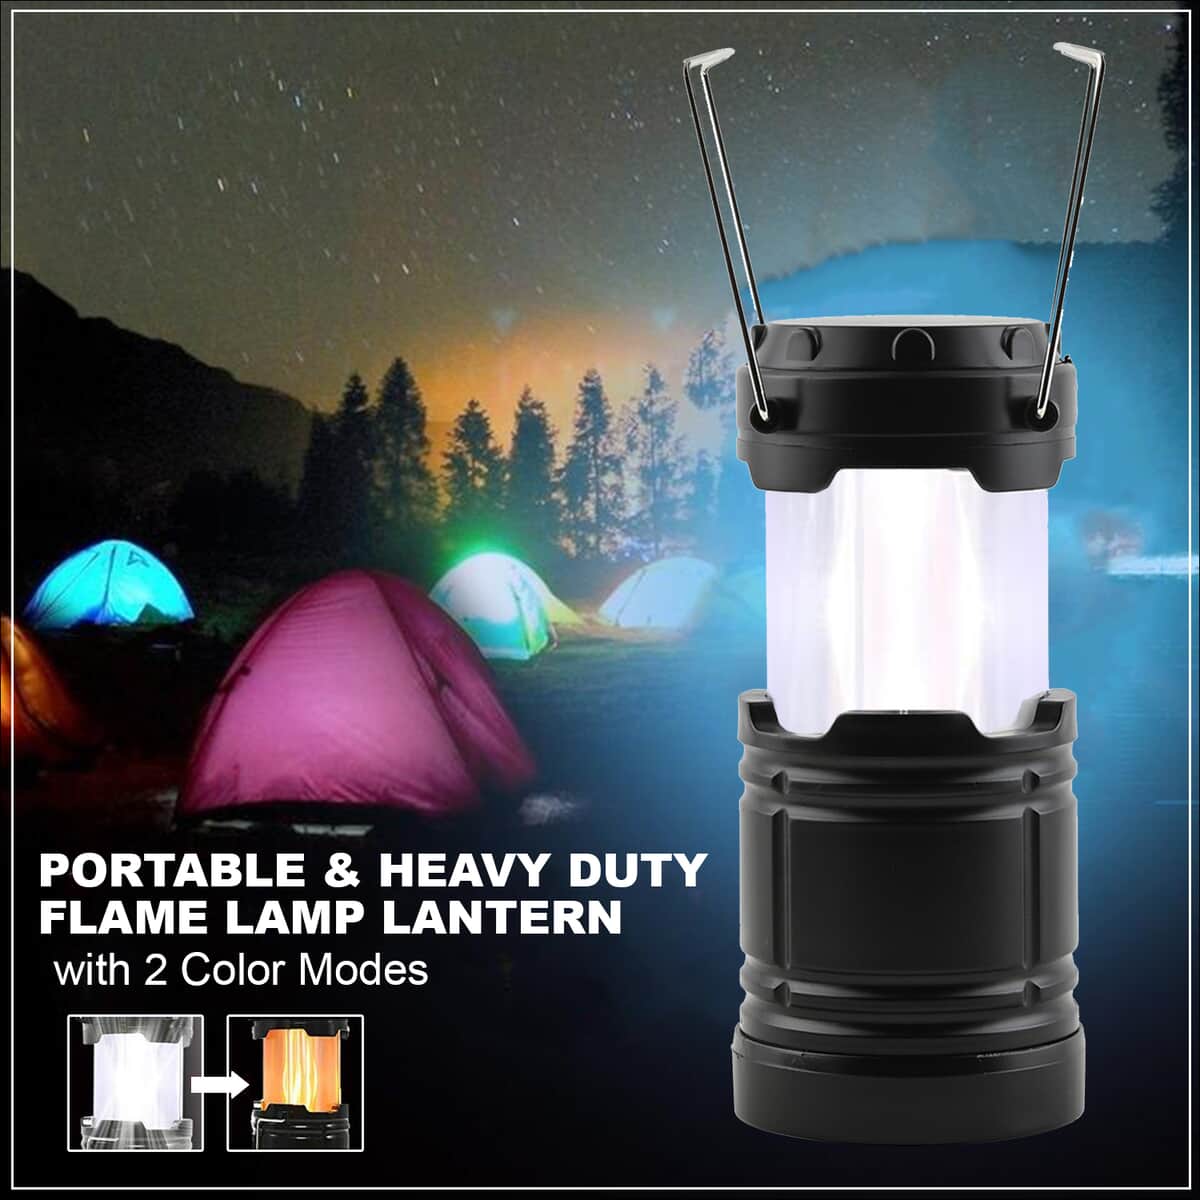 Portable & Heavy Duty Flame Lamp Lantern with 2 Color Modes image number 1